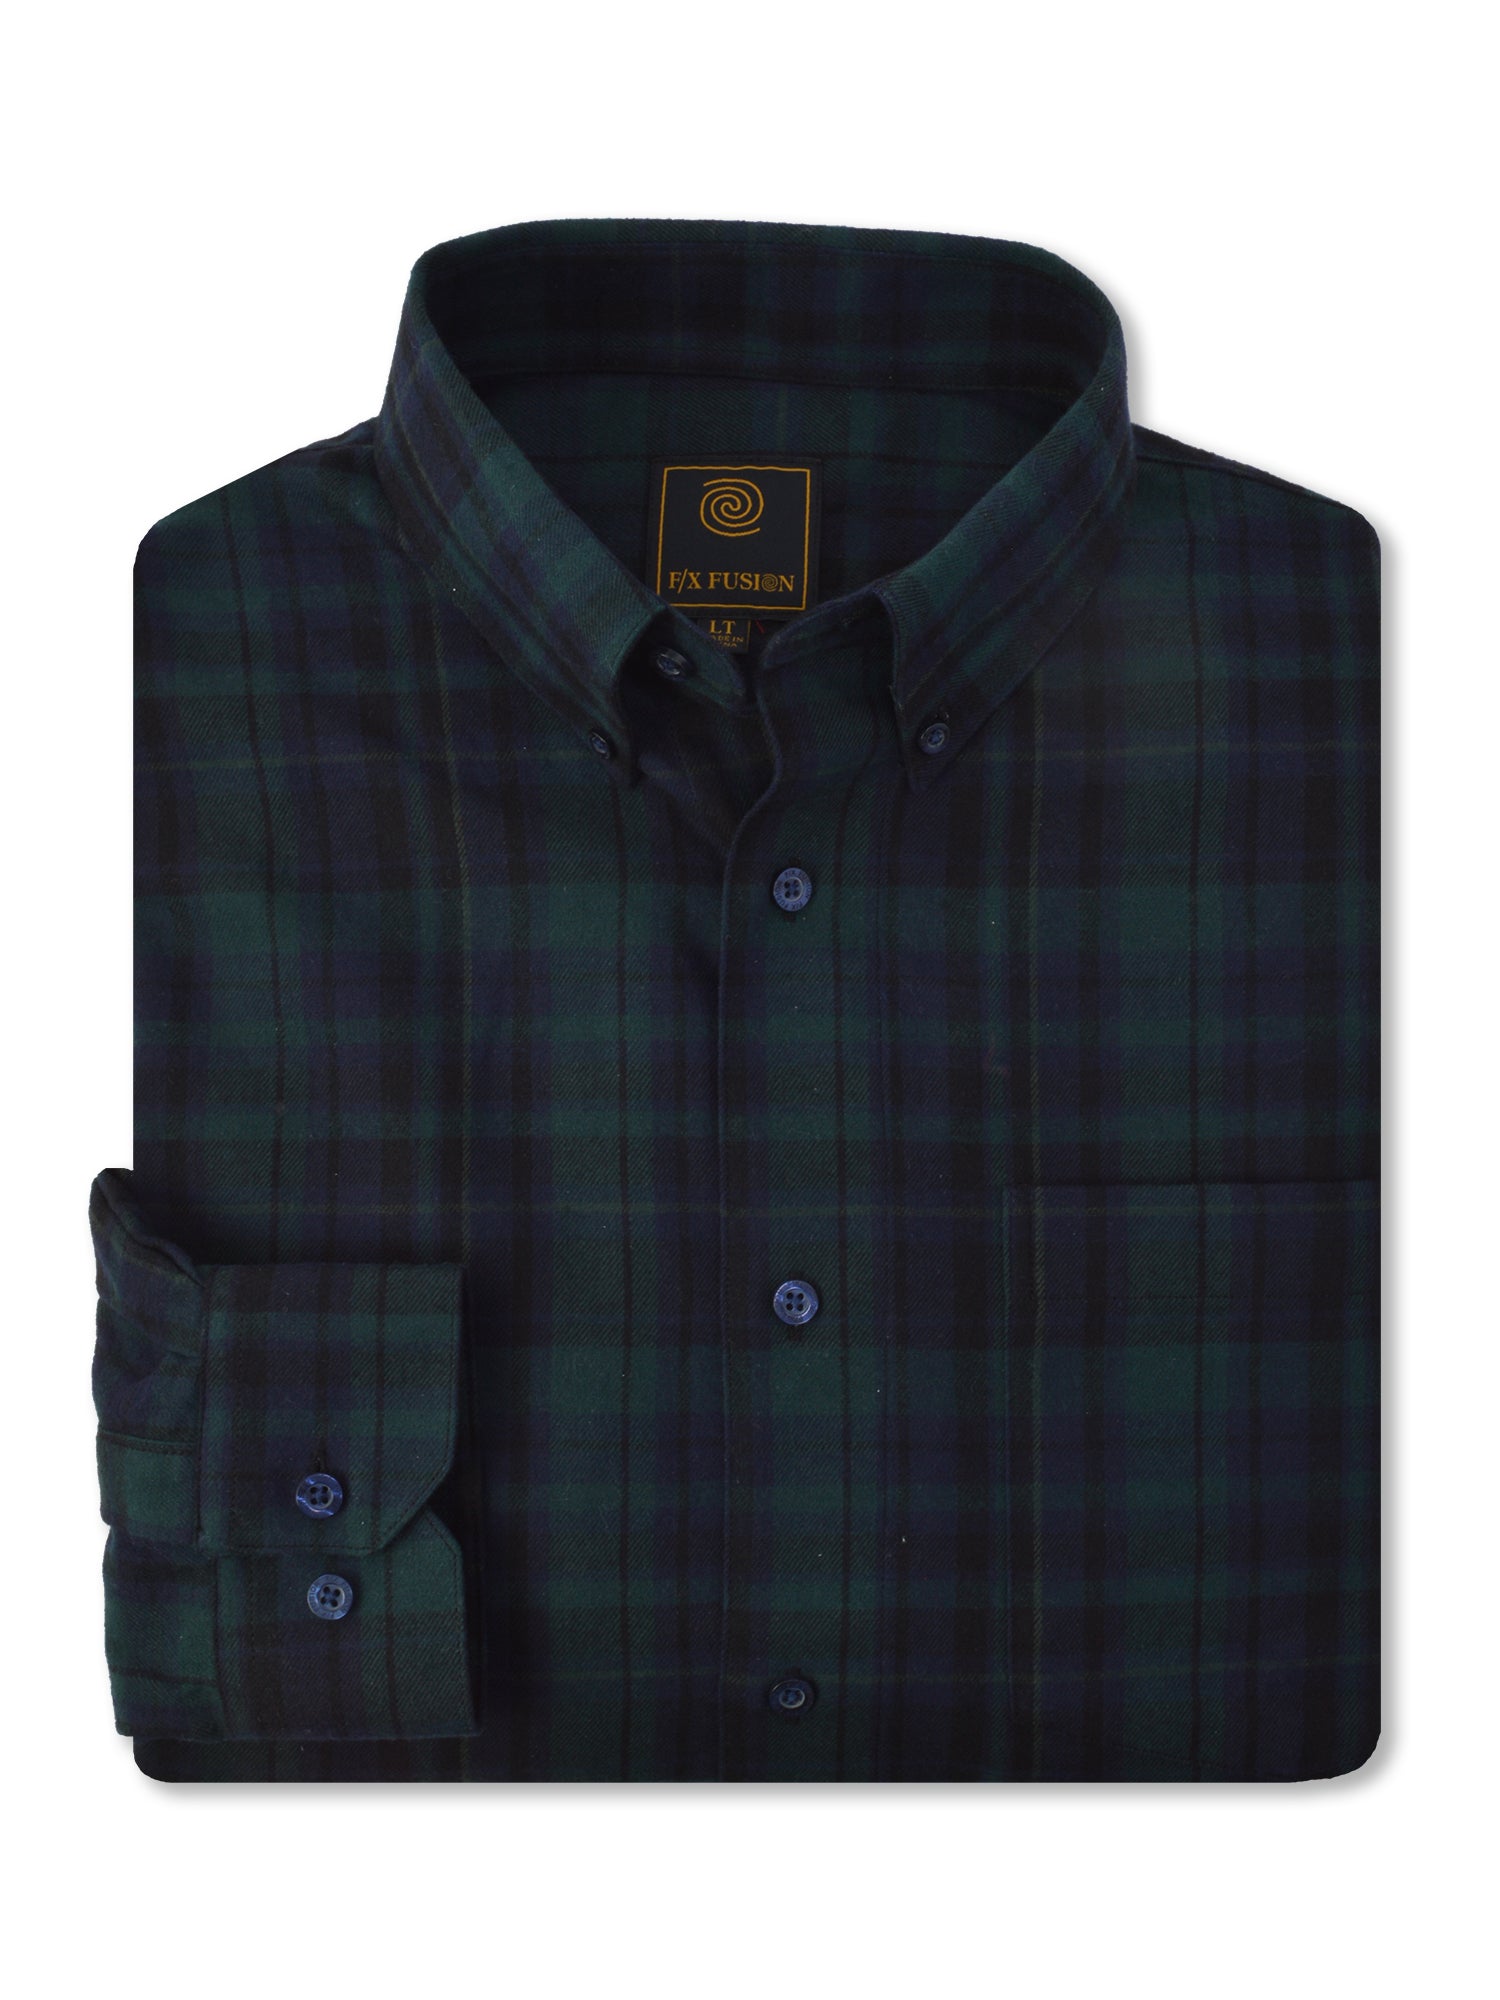 Westers raket Bewijs F/X Fusion Flannel Plaid Shirt in Green - Tall Man Sizes | Muldoon's Men's  Wear